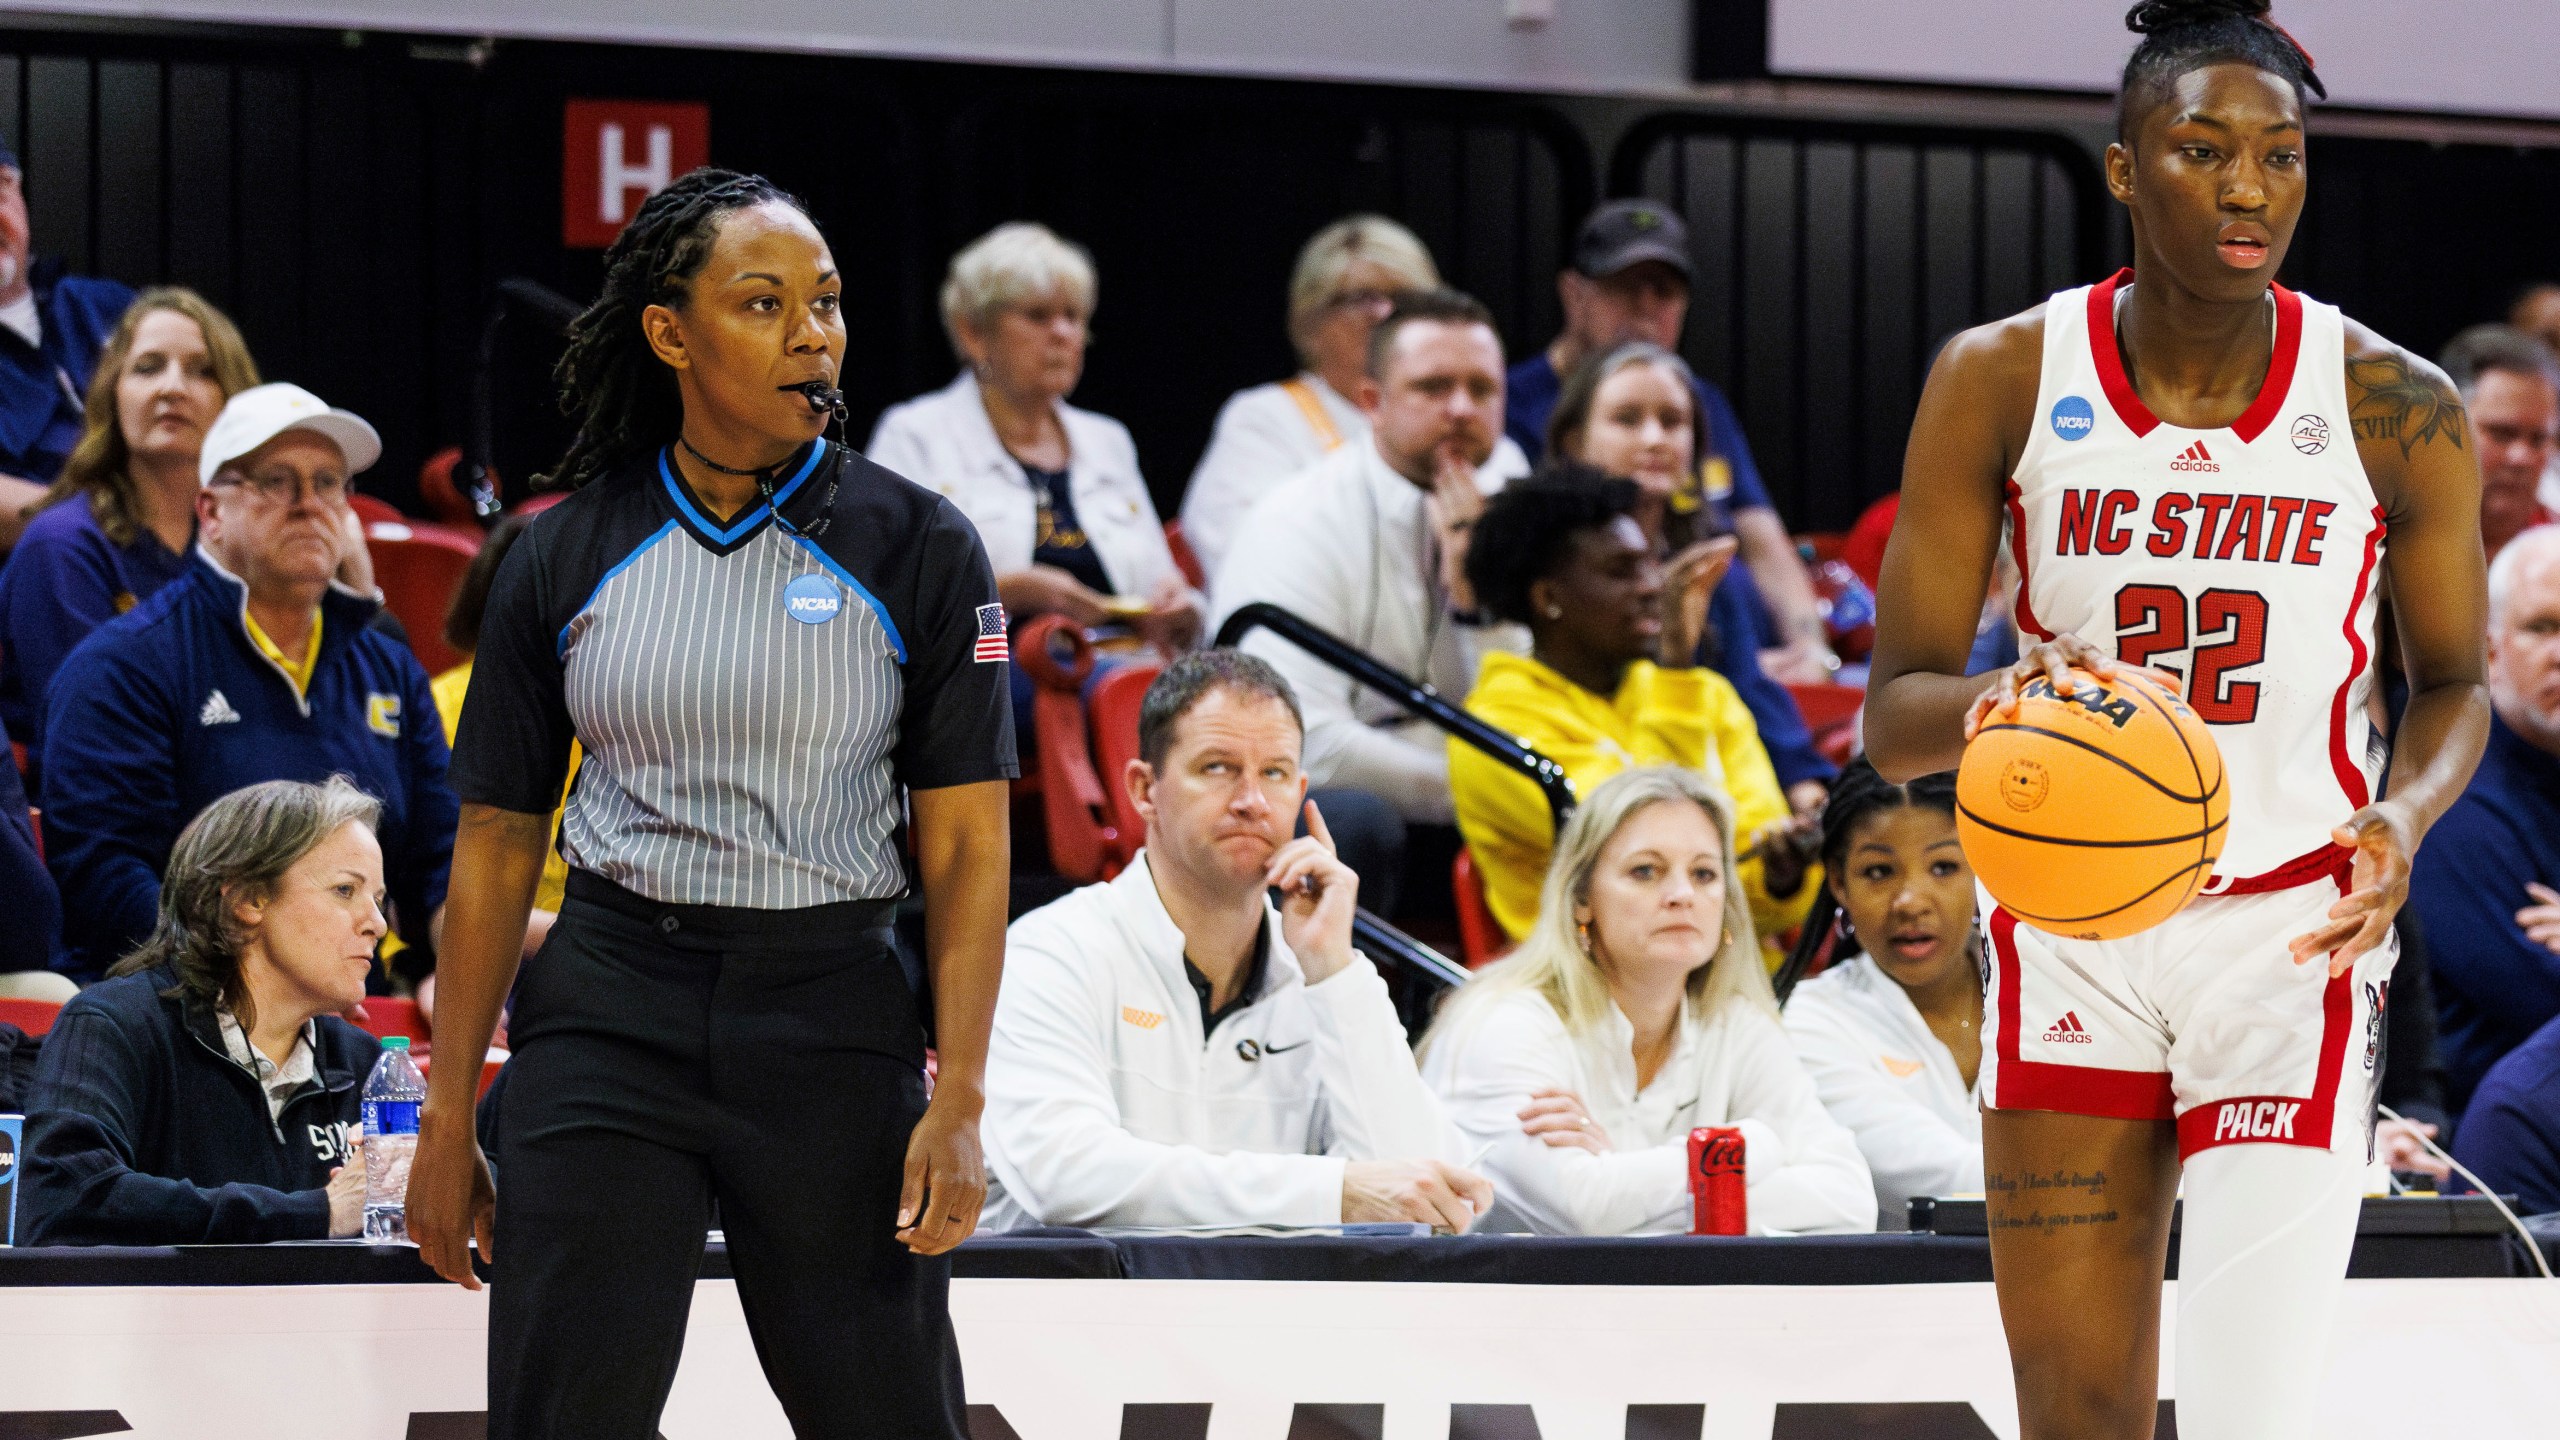 Official Tommi Paris, left, watches as North Carolina State's Saniya Rivers (22) handles the ball during the first half of a first-round college basketball game in the NCAA Tournament in Raleigh, N.C., Saturday, March 23, 2024. Paris was replaced at halftime by referee Angelica Suffren, who worked the earlier Green Bay-Tennessee game. NCAA representatives on-site didn’t provide a reason for the change. (AP Photo/Ben McKeown)